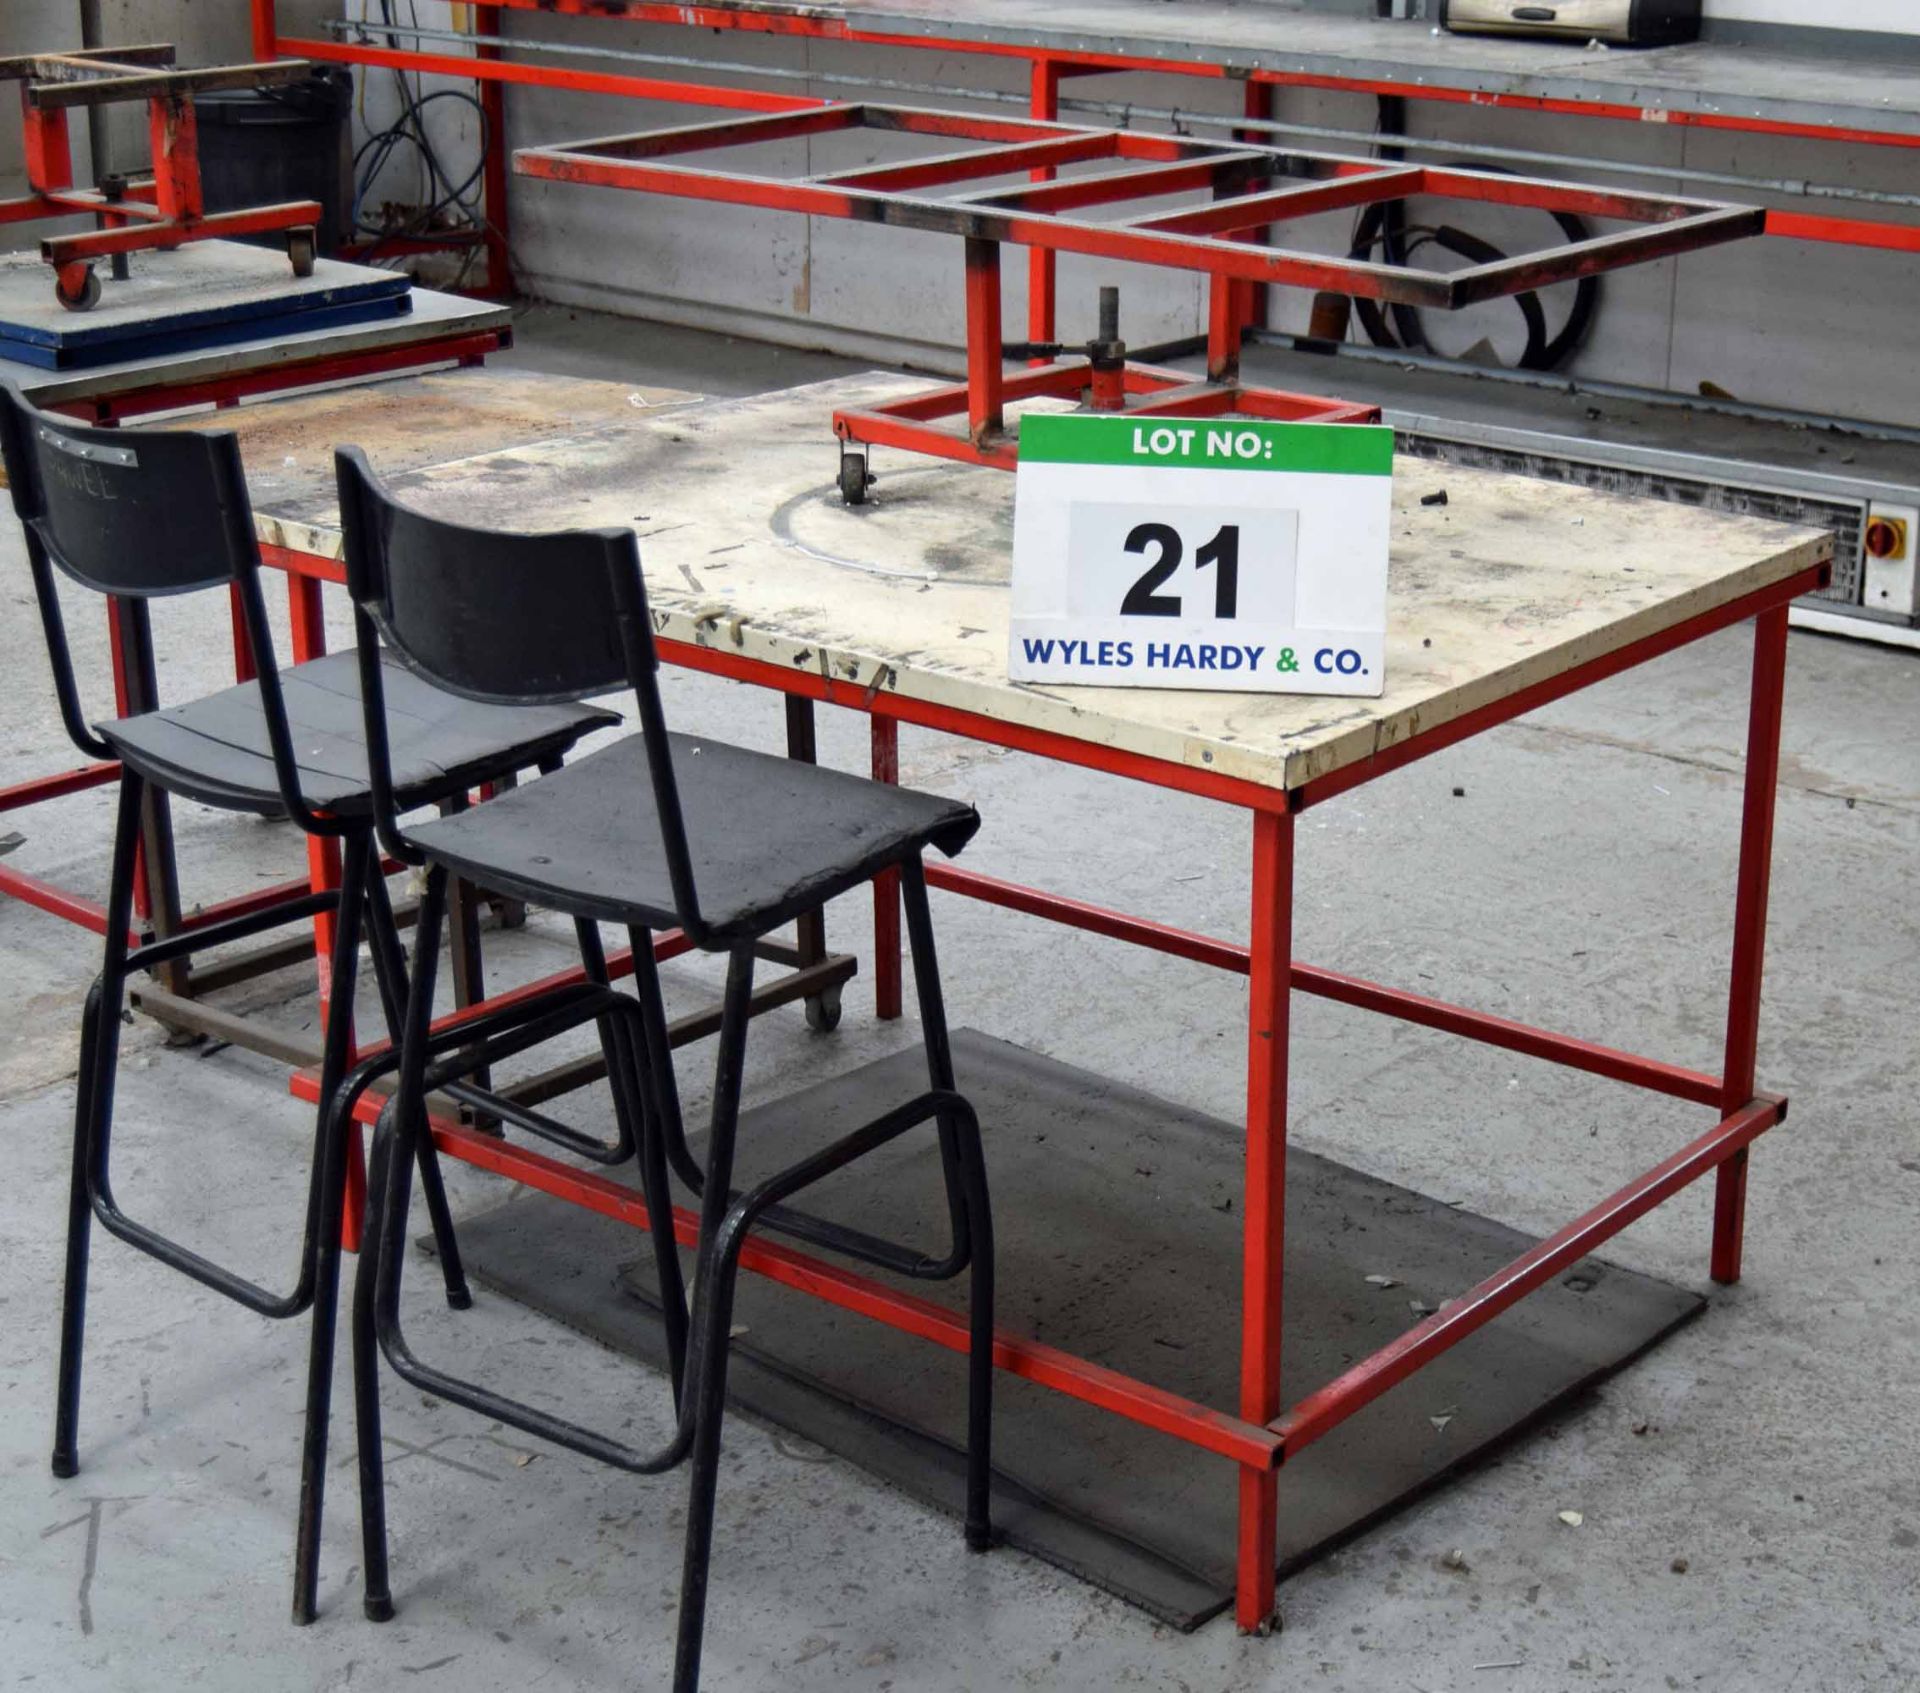 A Welded Steel Assembly Table with Rotating Workpiece Jig, Two Stools and Side Table (As